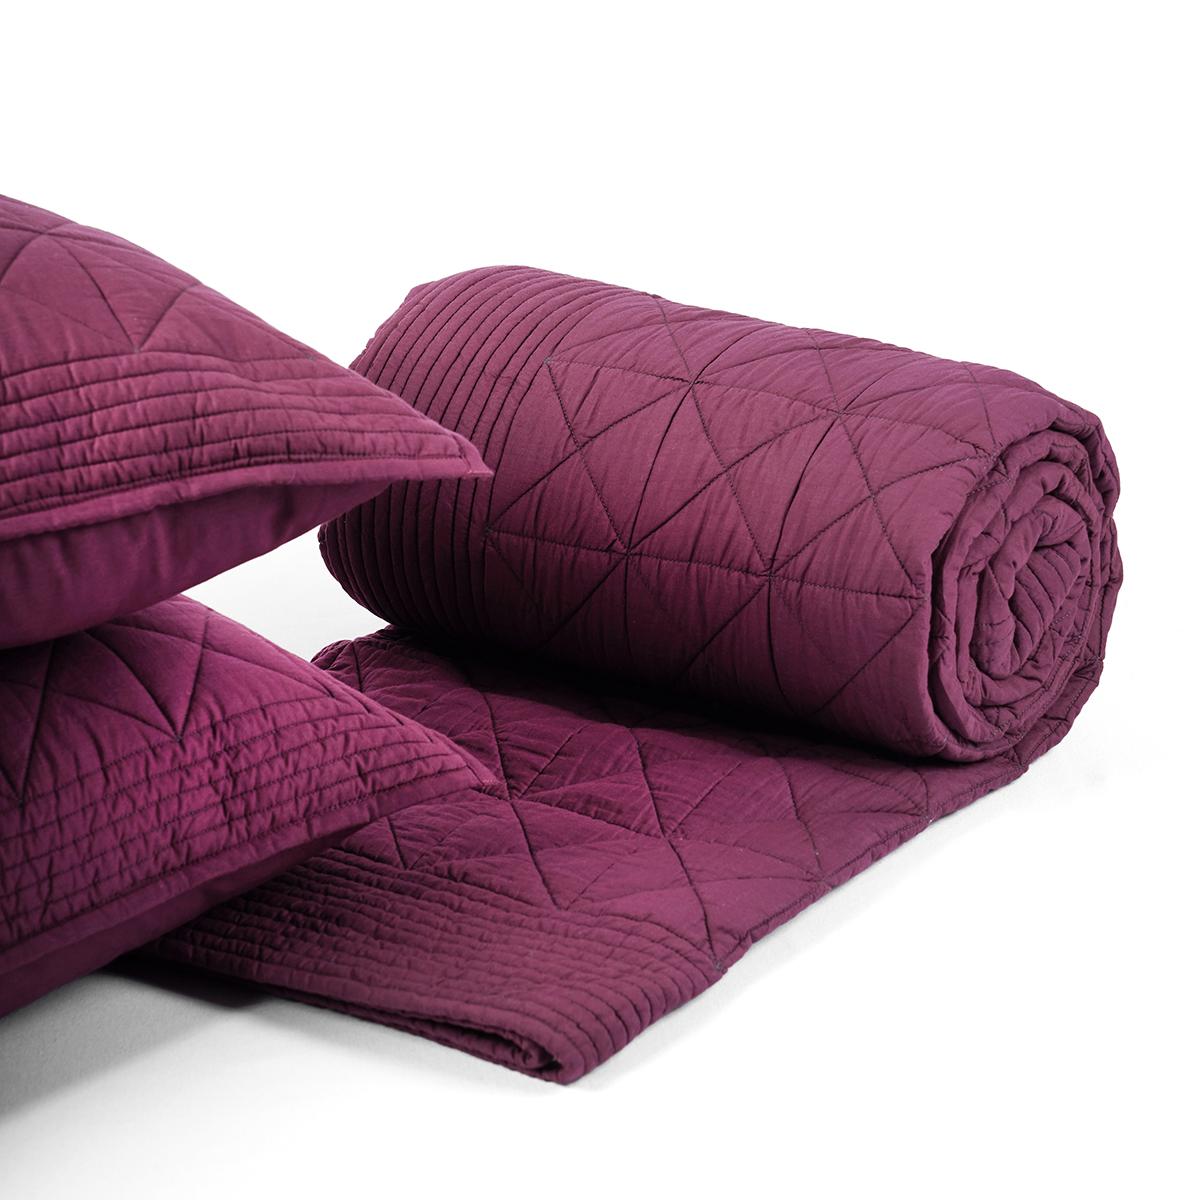 PLUM cotton Quilt with 2 coordinated pillow cases, Sizes available